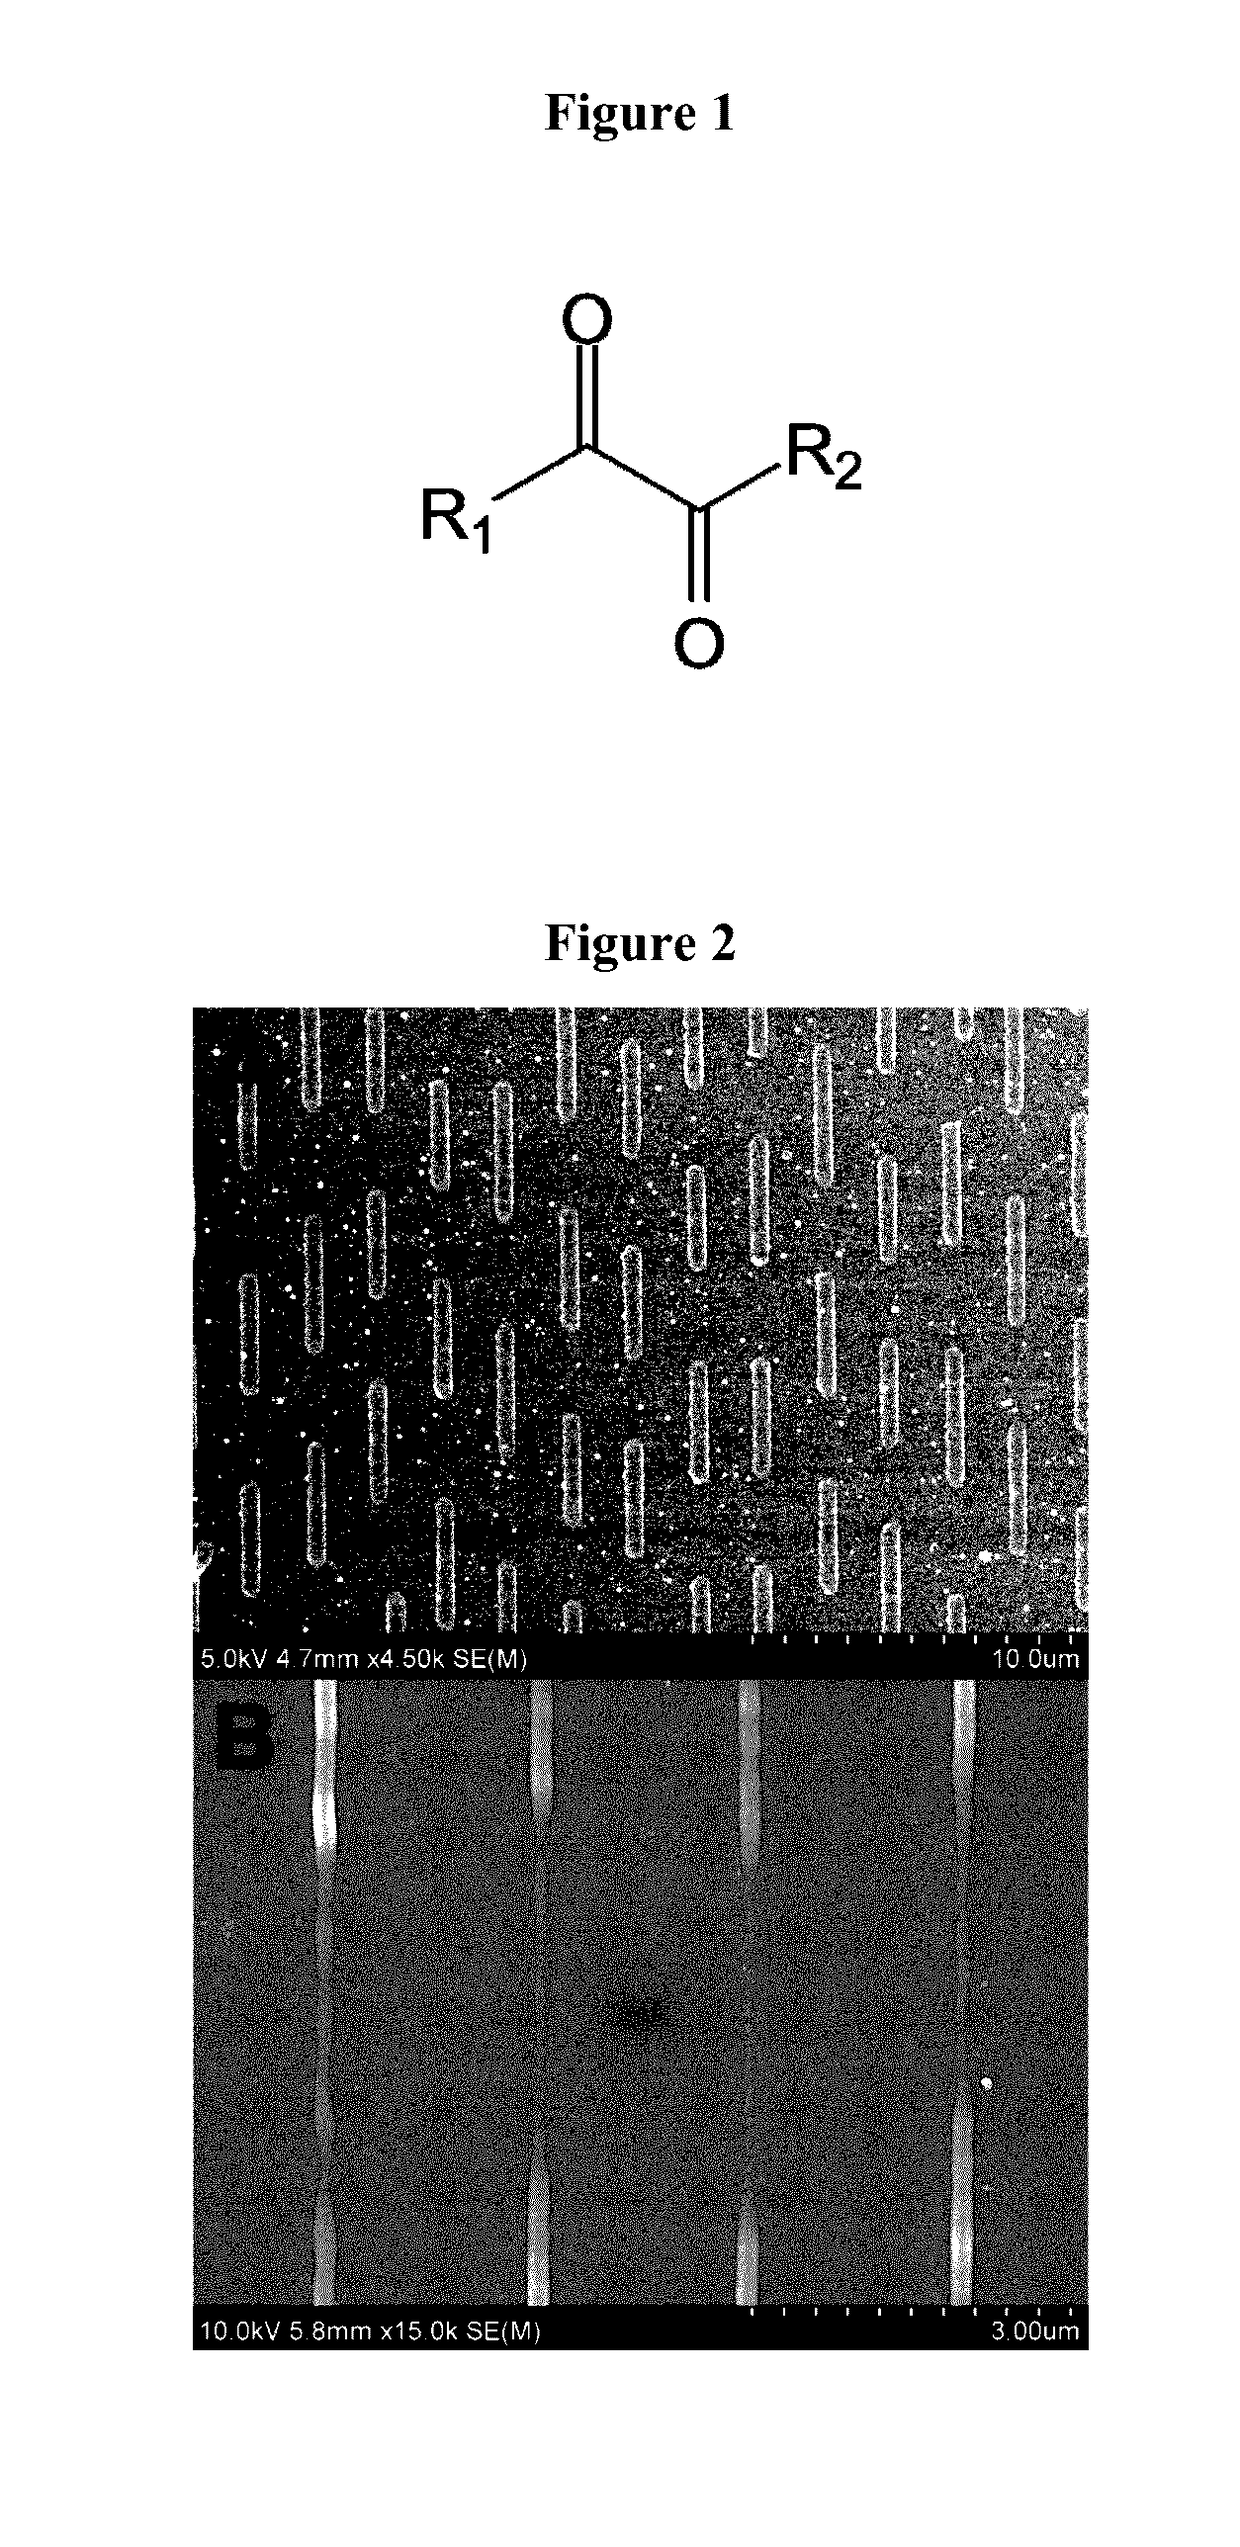 Multicolor Photolithography Materials and Methods